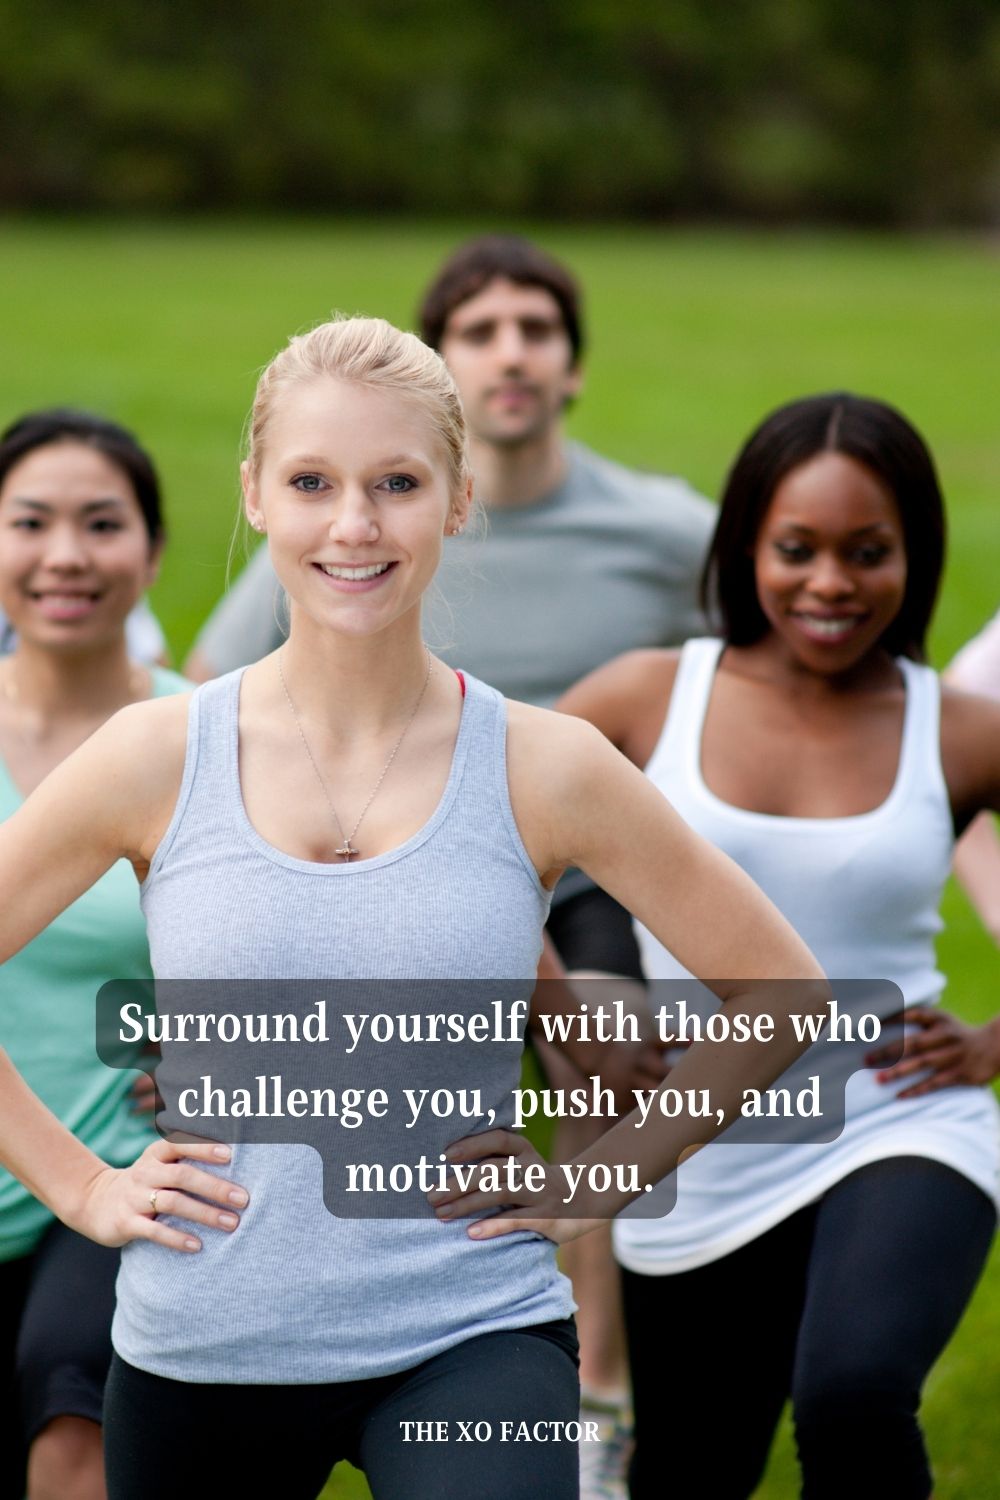 Surround yourself with those who challenge you, push you, and motivate you.